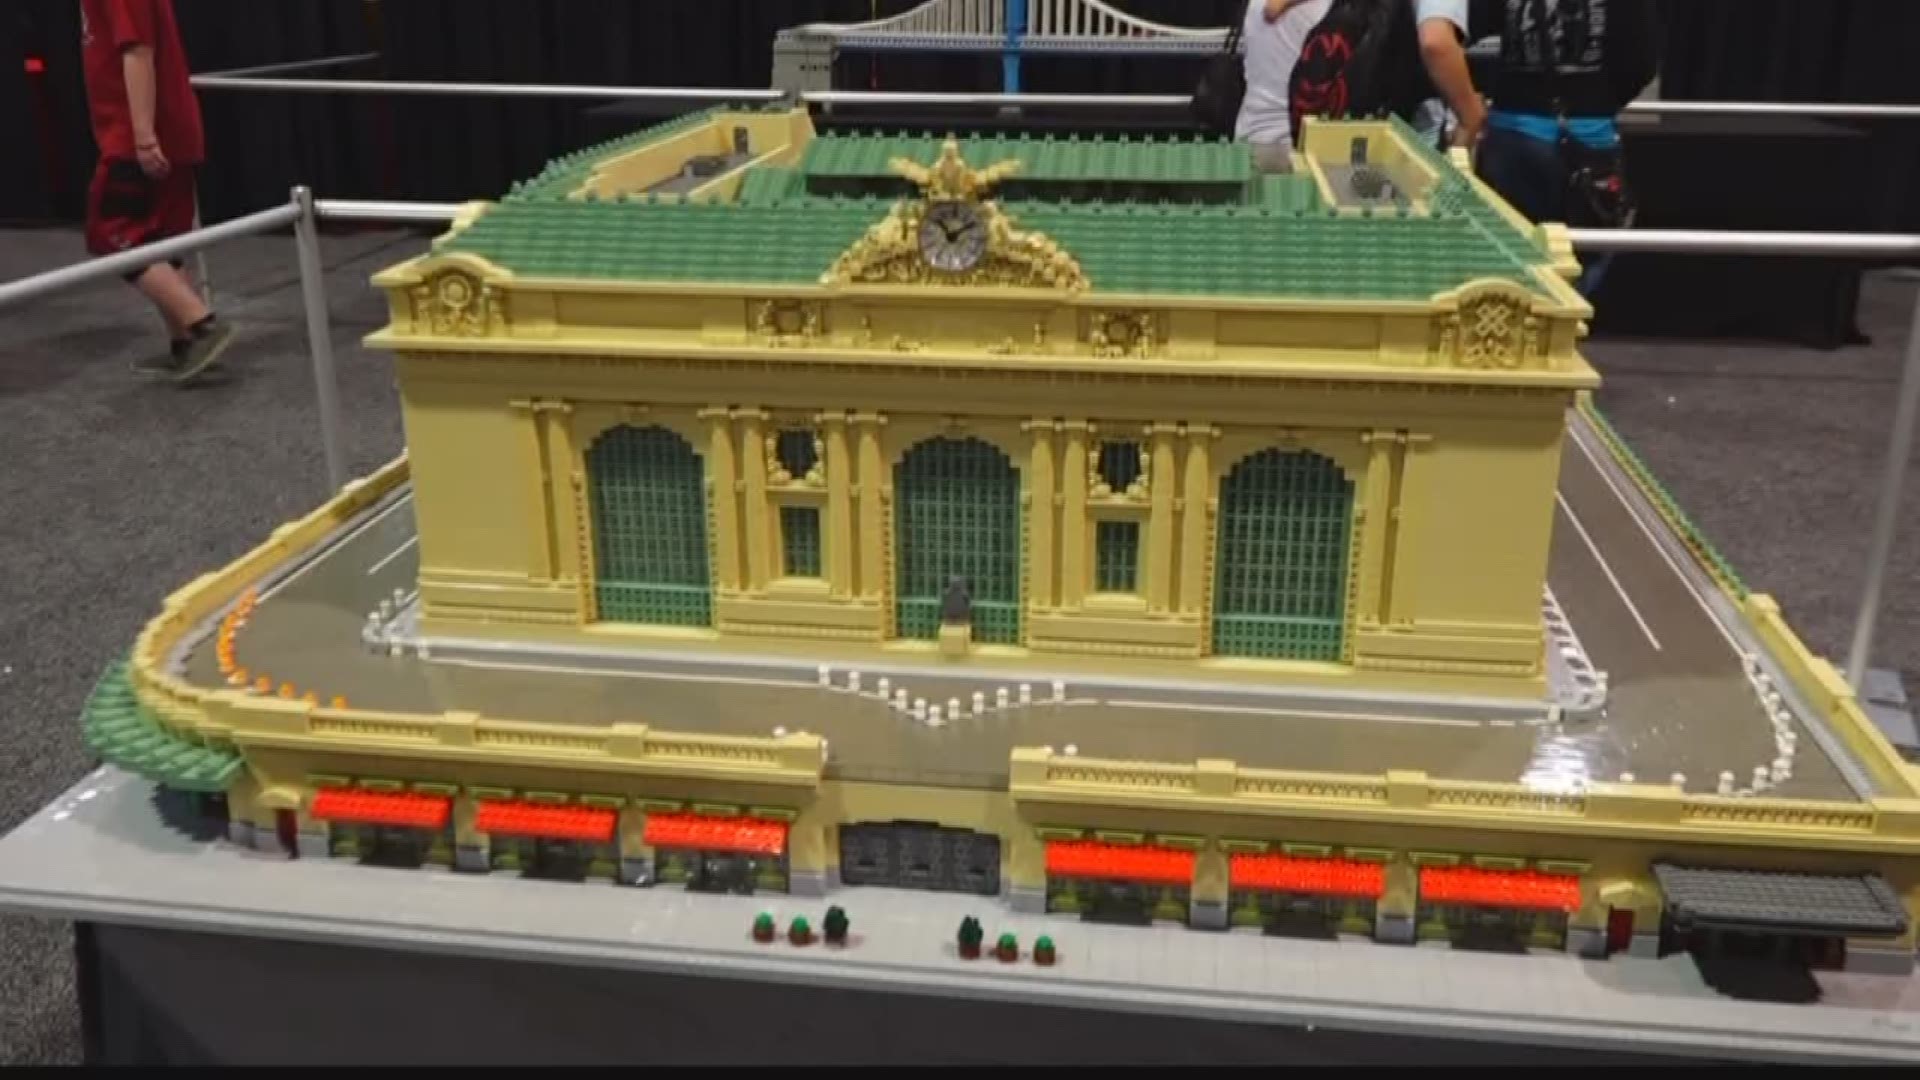 If you're a Lego maniac, the place you need to be is in Columbia this weekend.